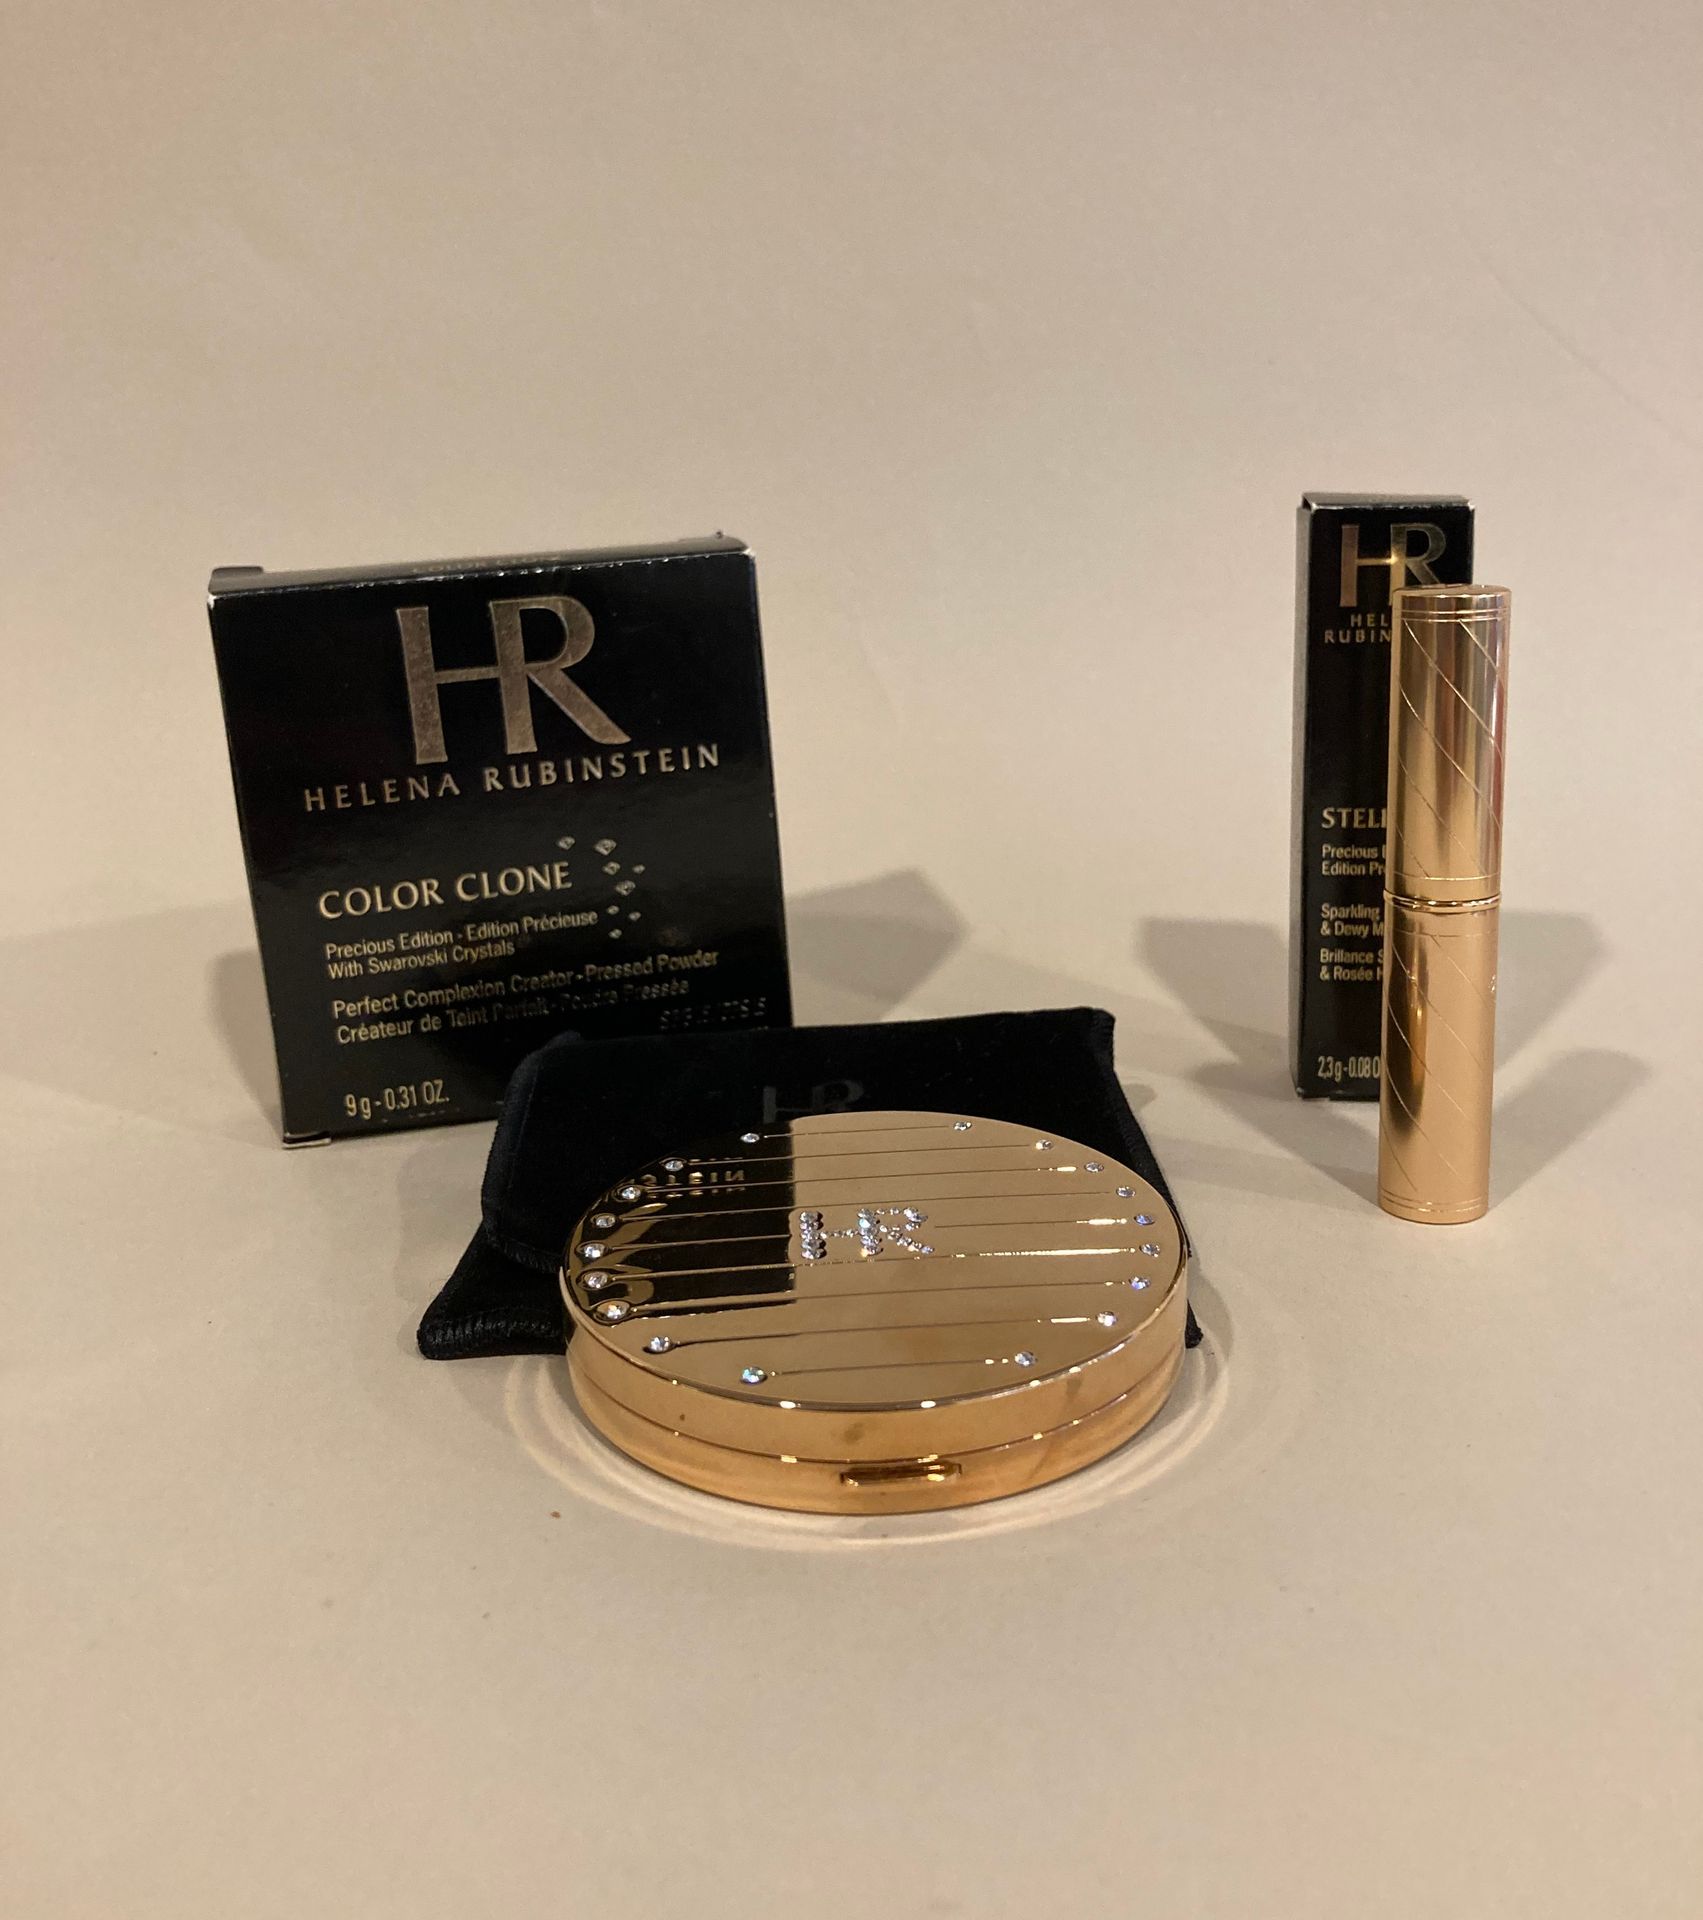 Null HELENA RUBINSTEIN

Precious edition including a compact powder compact with&hellip;